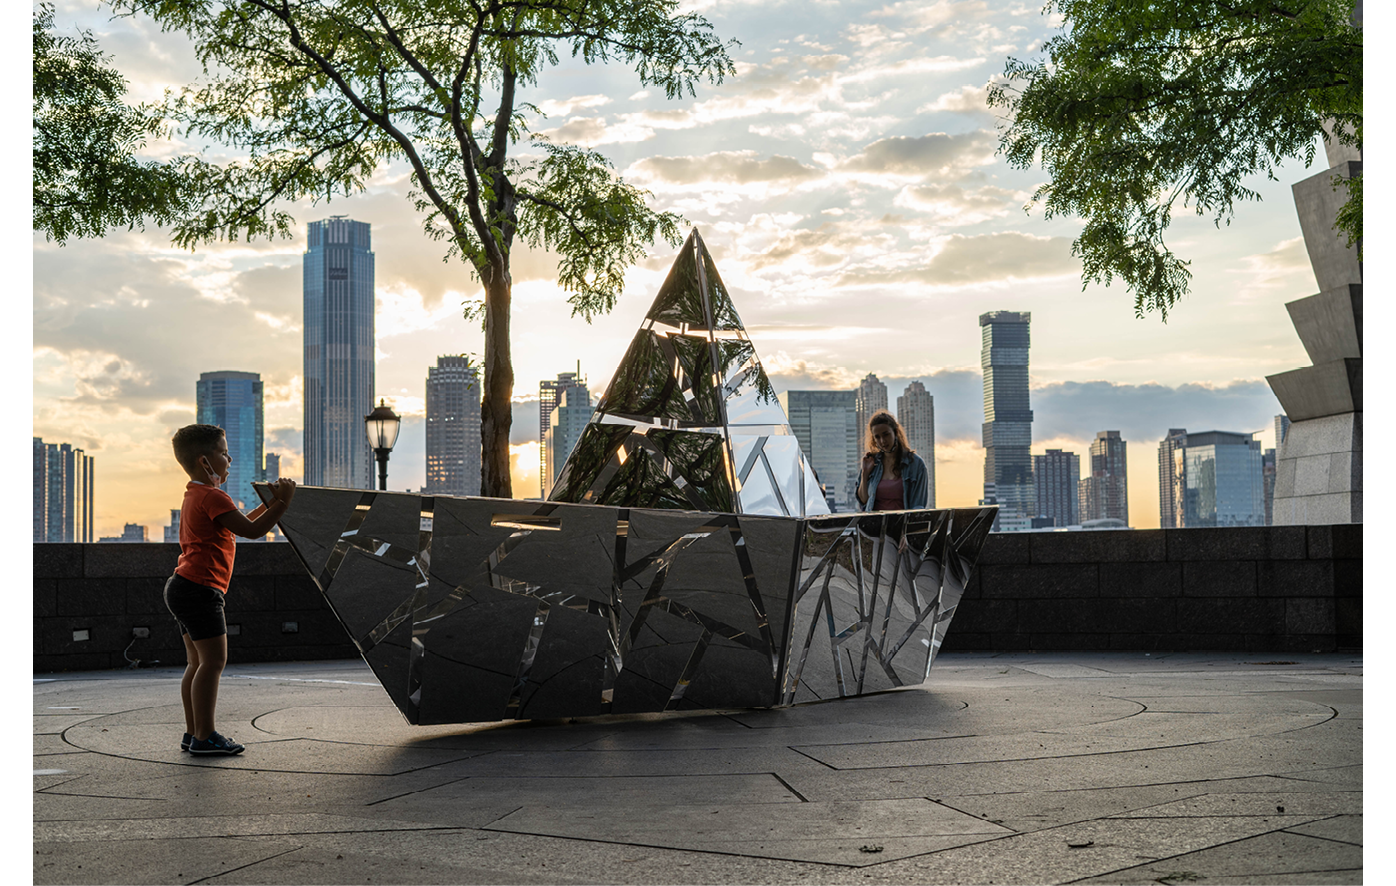 This image shows a young boy holding a geometric mirrored steel boat sculpture. The sculpture looks like a paper boat with lines cut through sections to allow light to pass through remincent of a sundail.